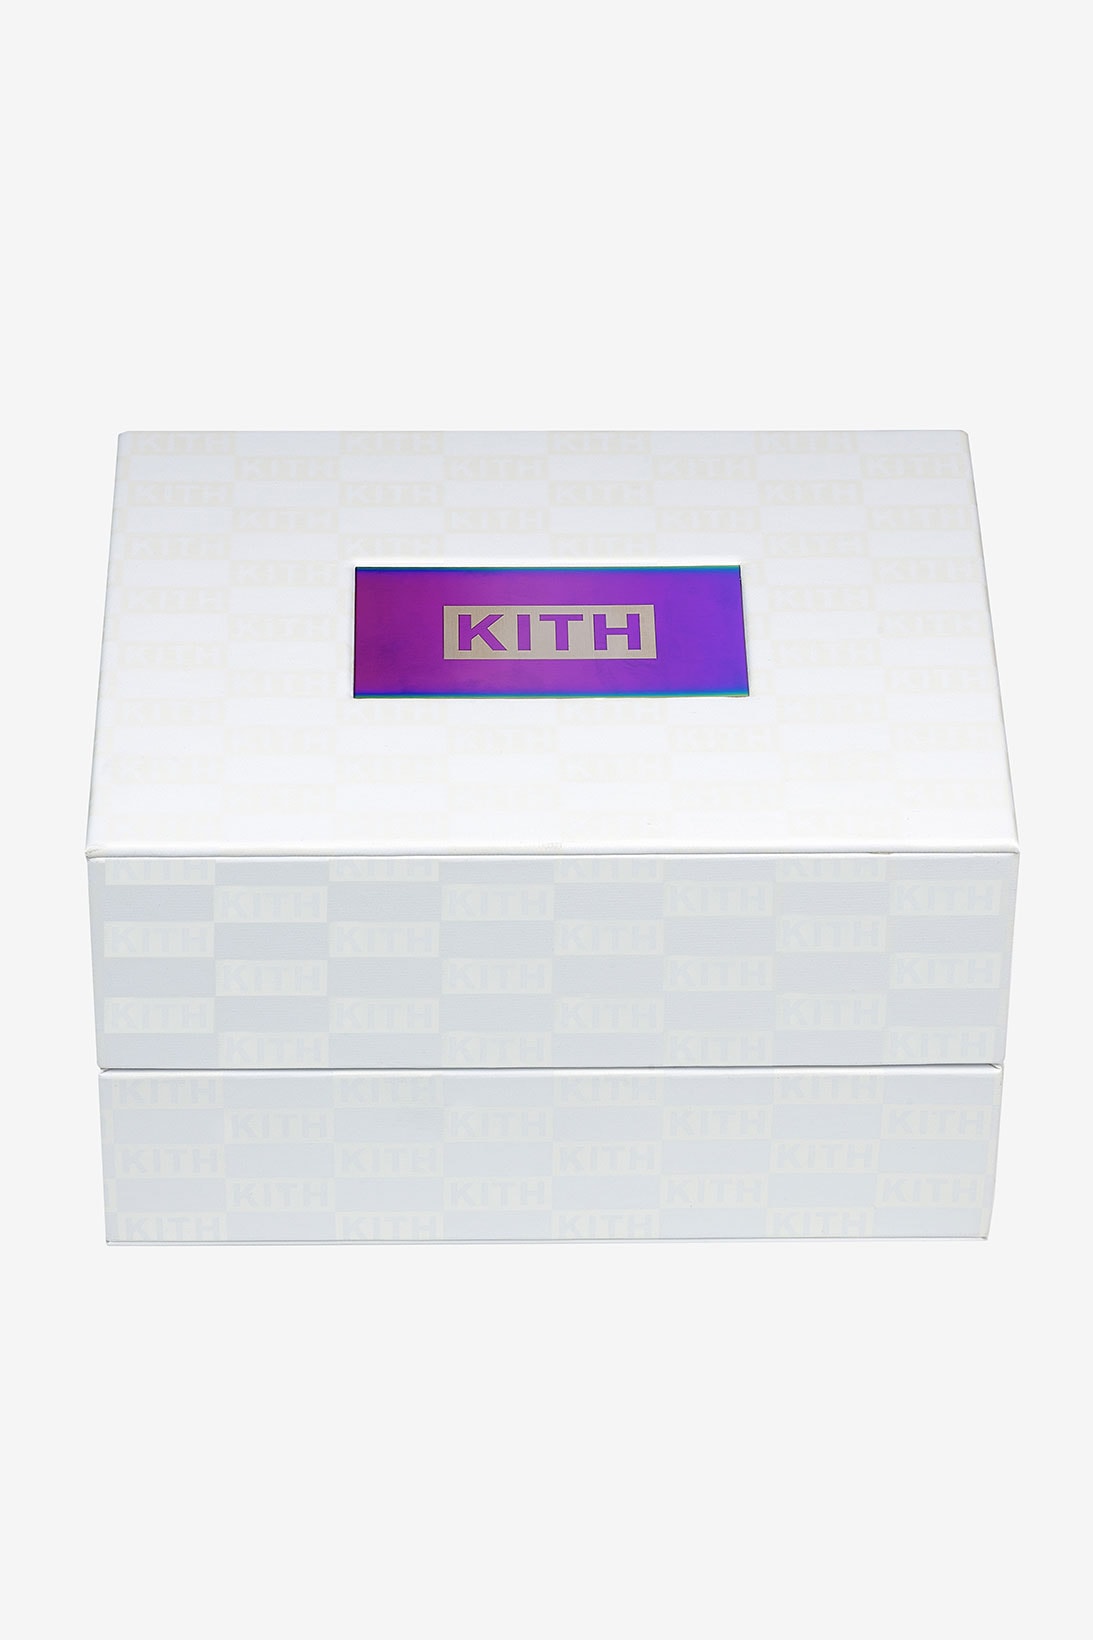 kith g-shock gm-6900 rainbow watches collaboration box packaging